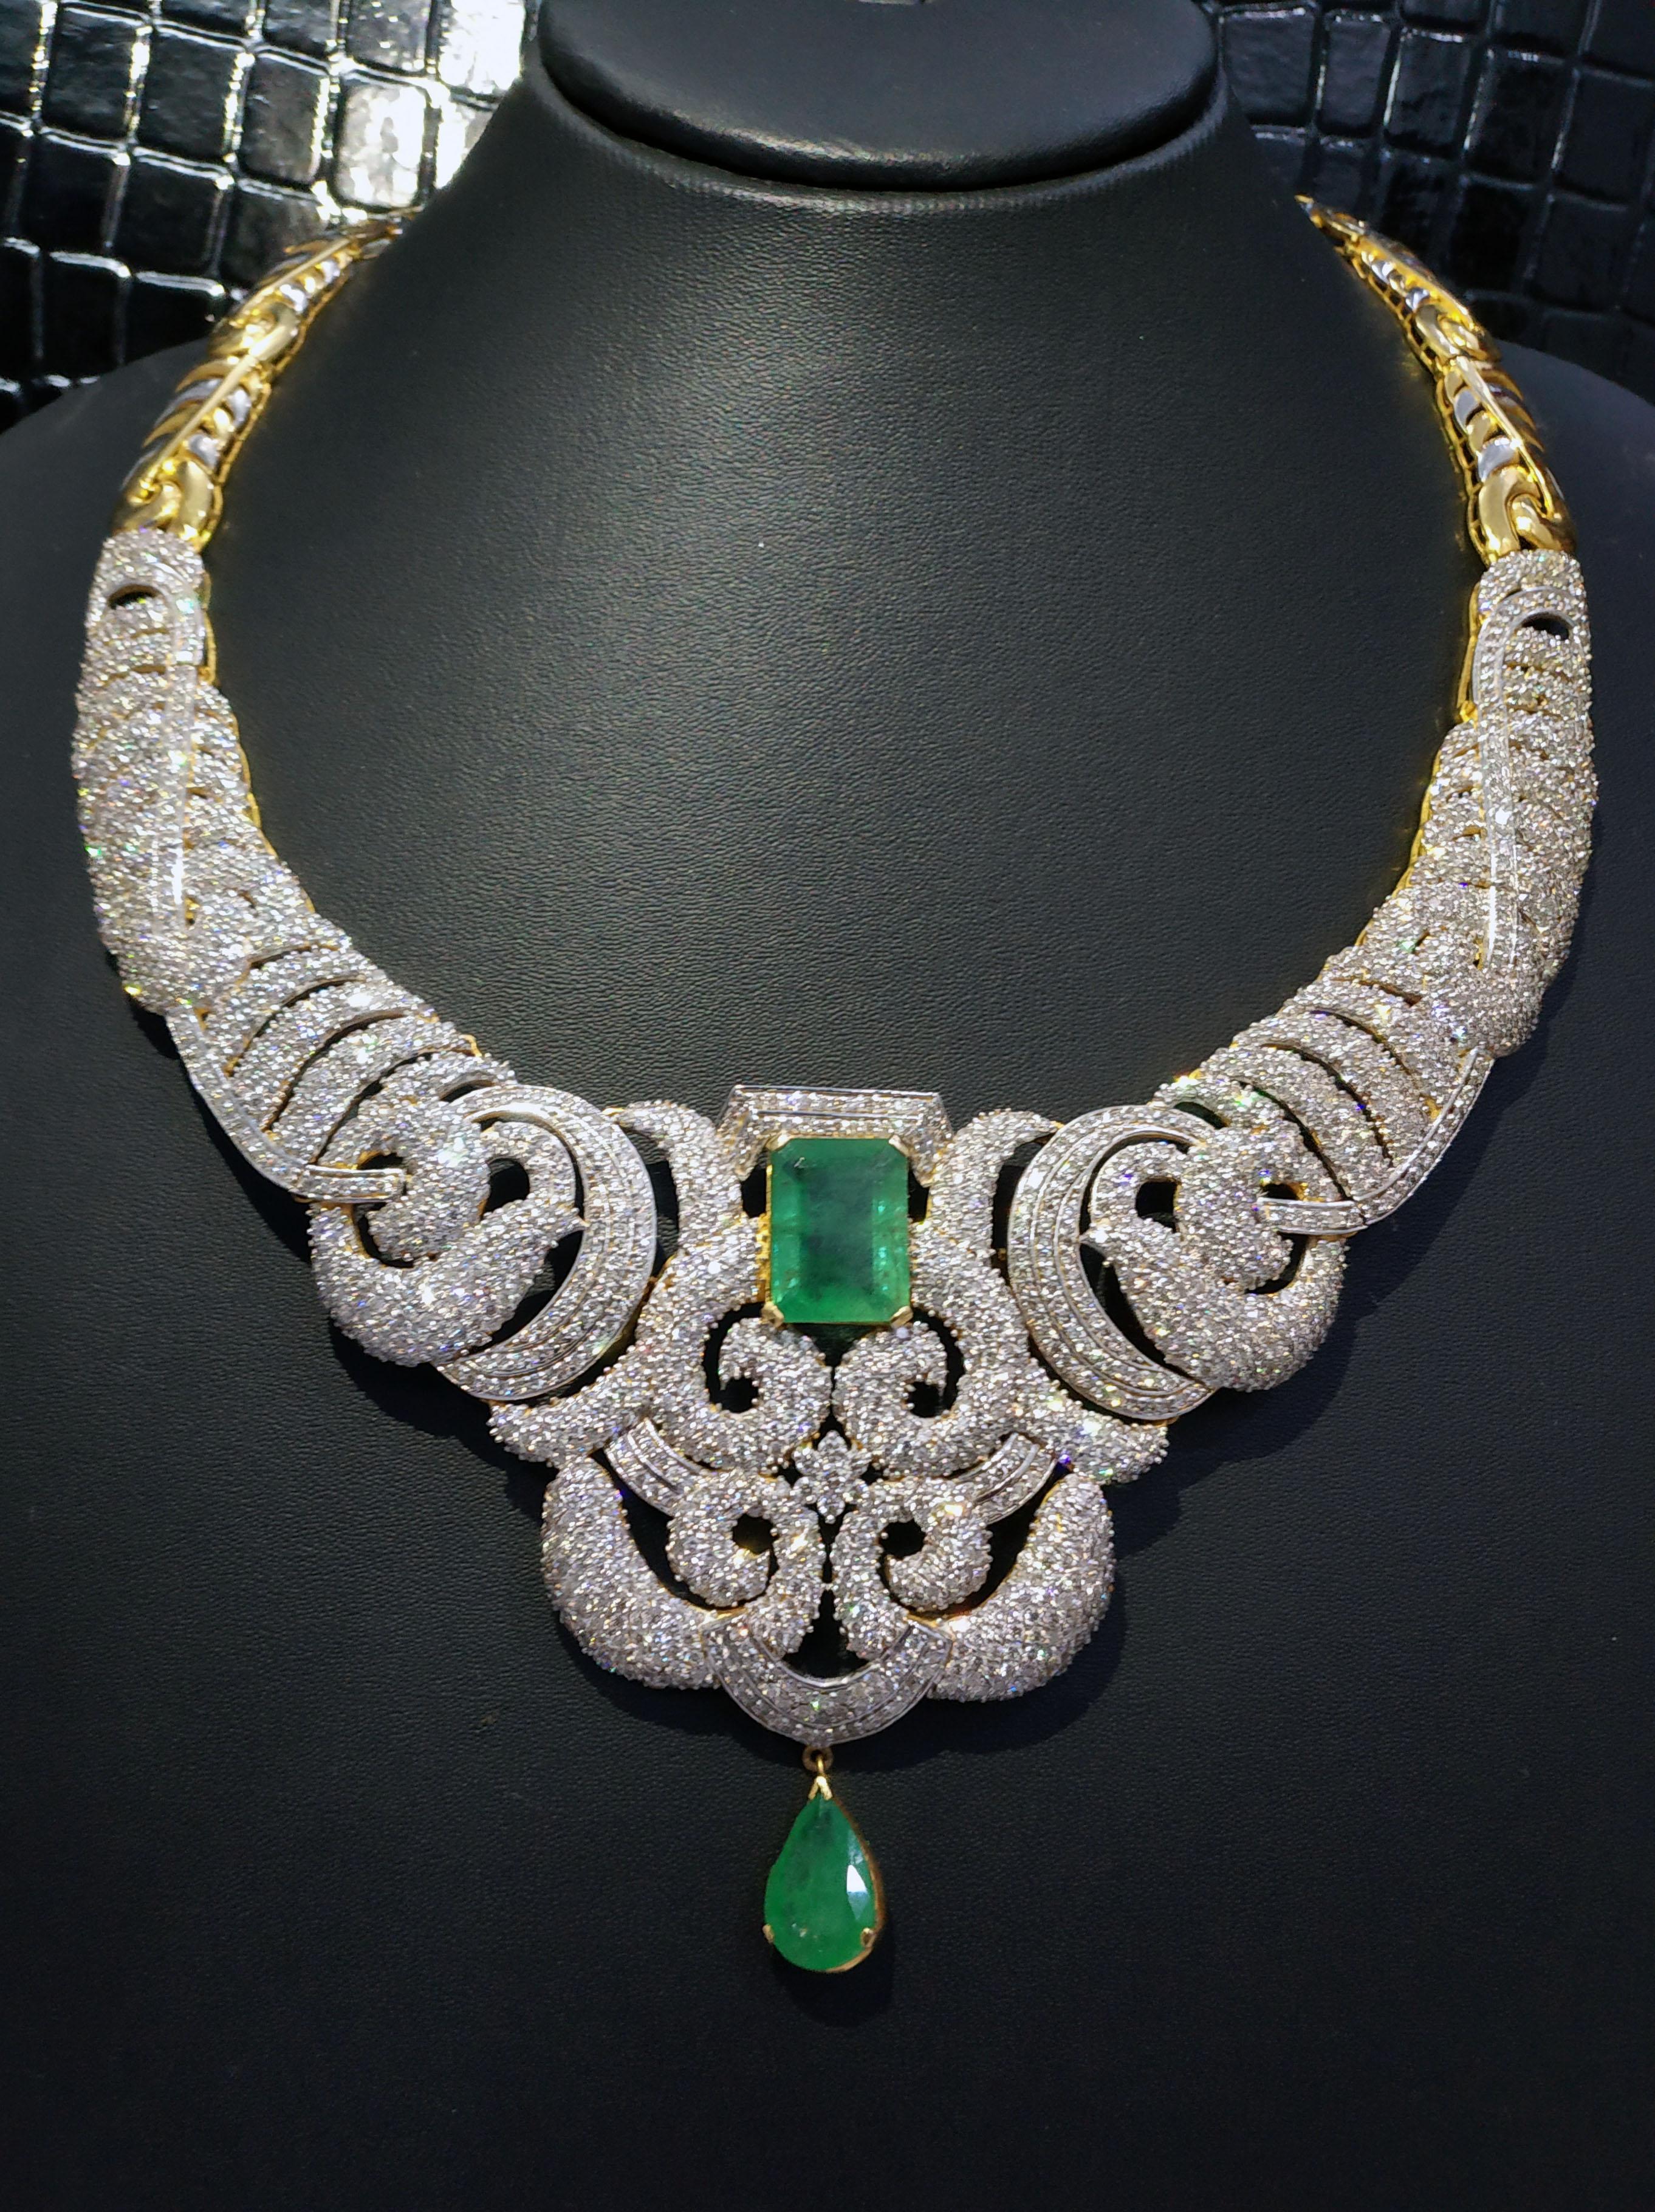 42 Carat Diamonds and 25 Carat Emerald Necklace and Earrings Set For Sale 6